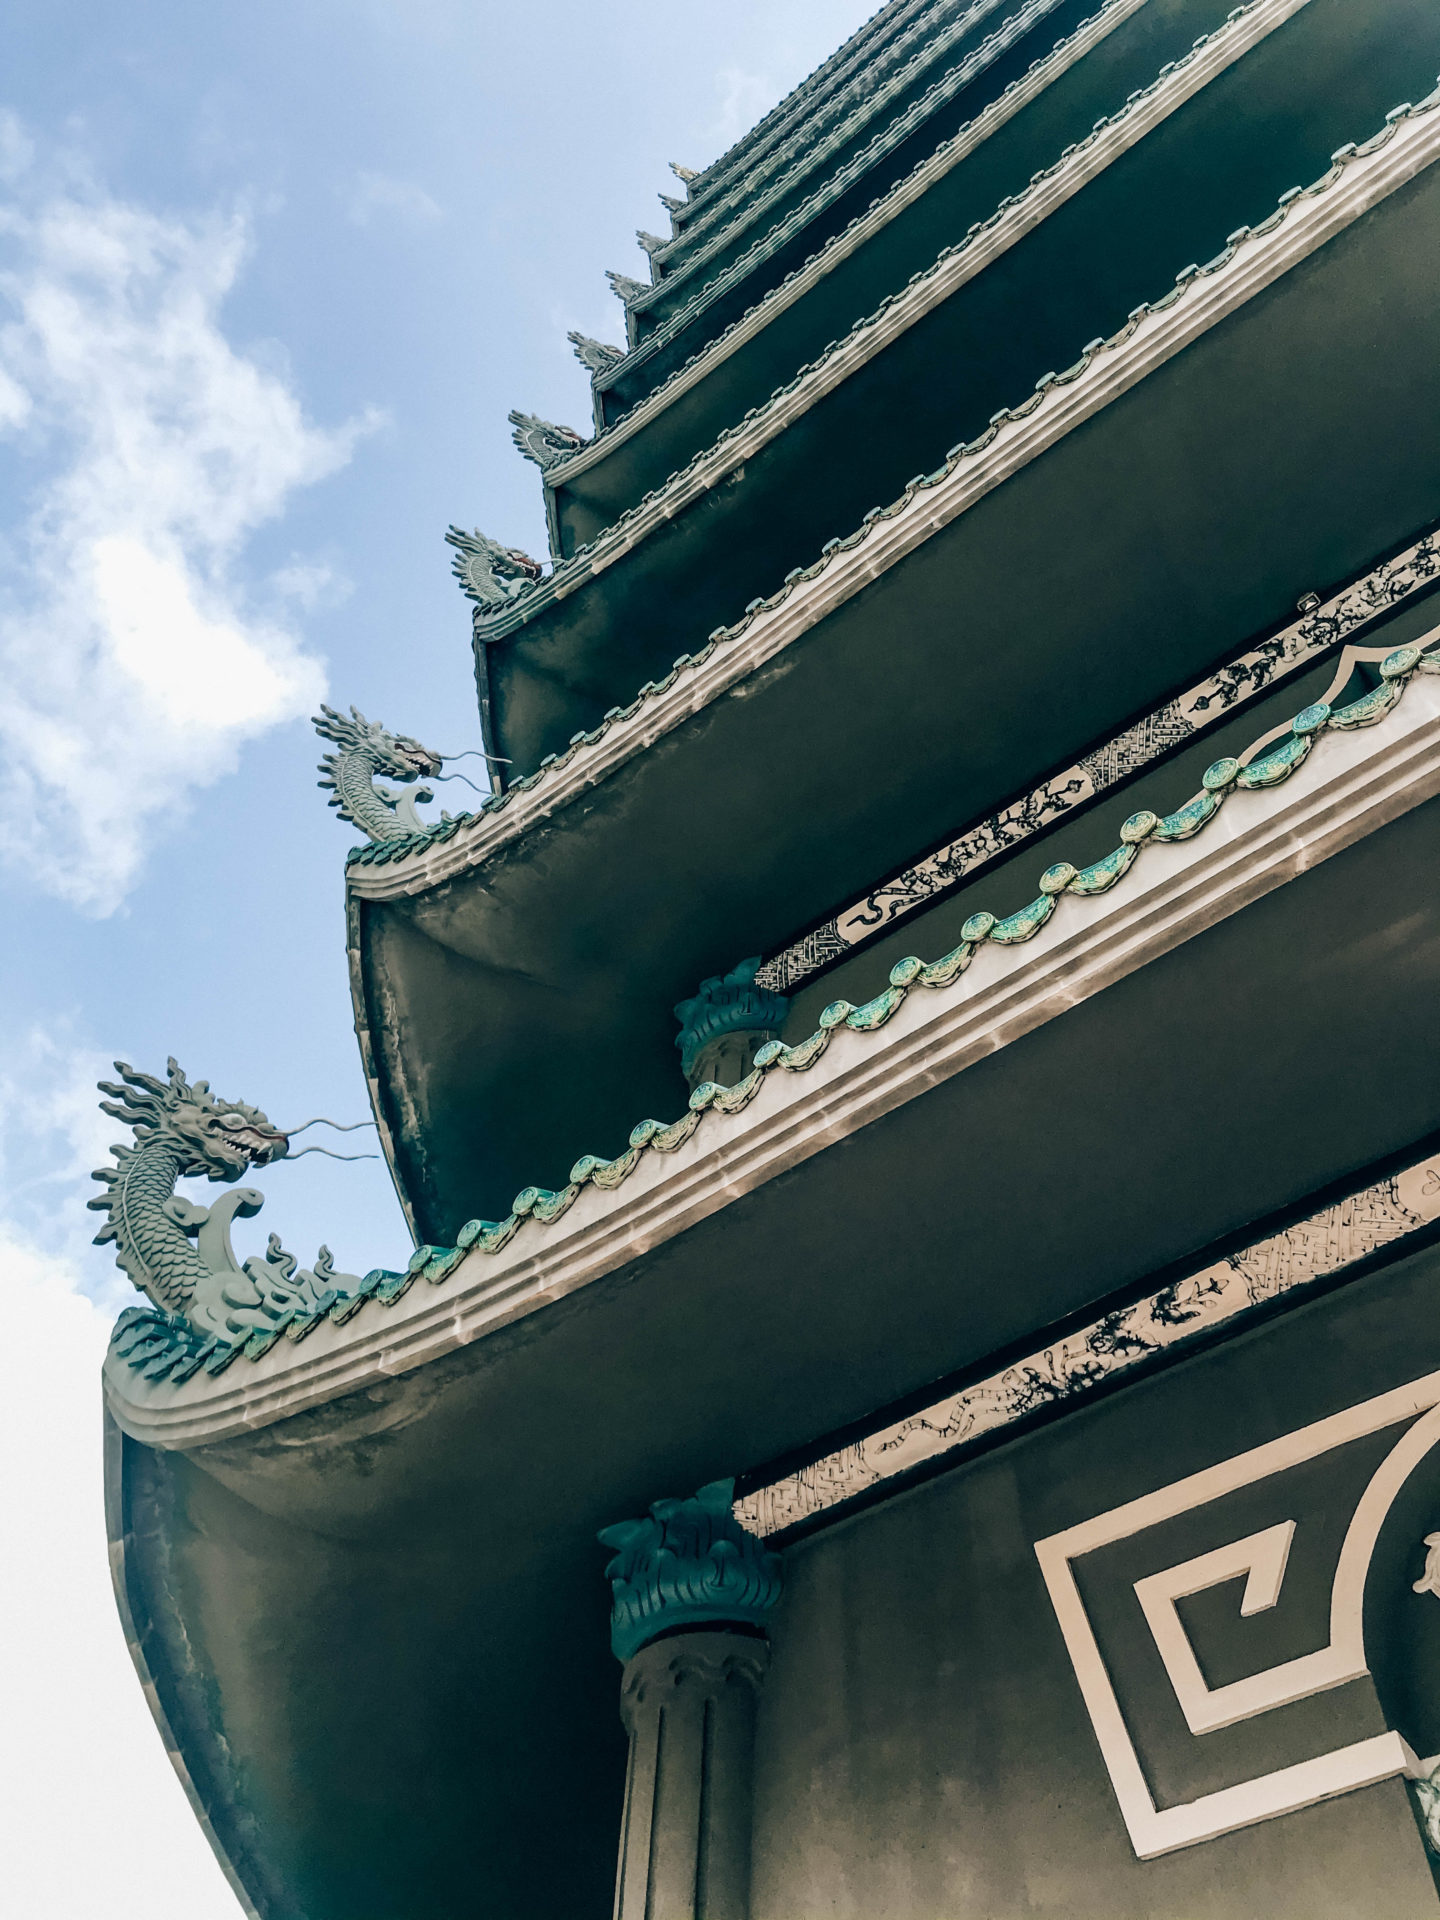 Dragon-shaped architecture in Linh Ung Pagoda